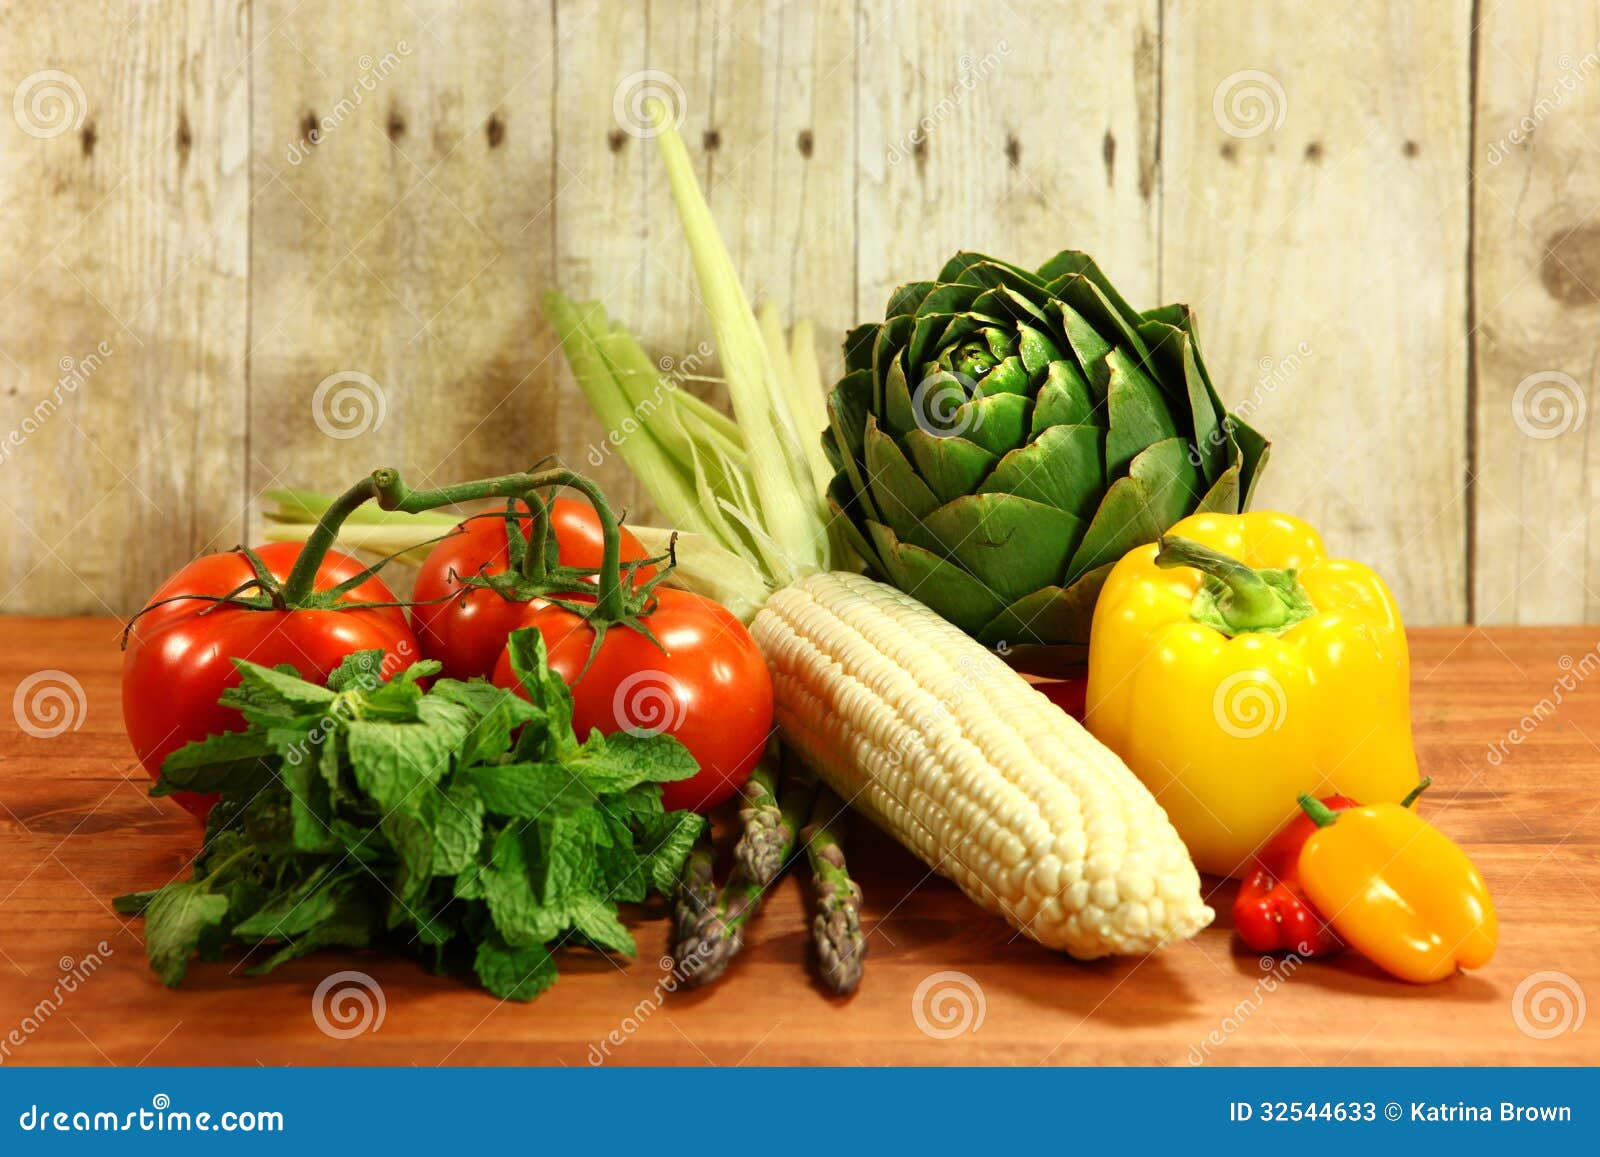 grocery produce items on a wooden plank